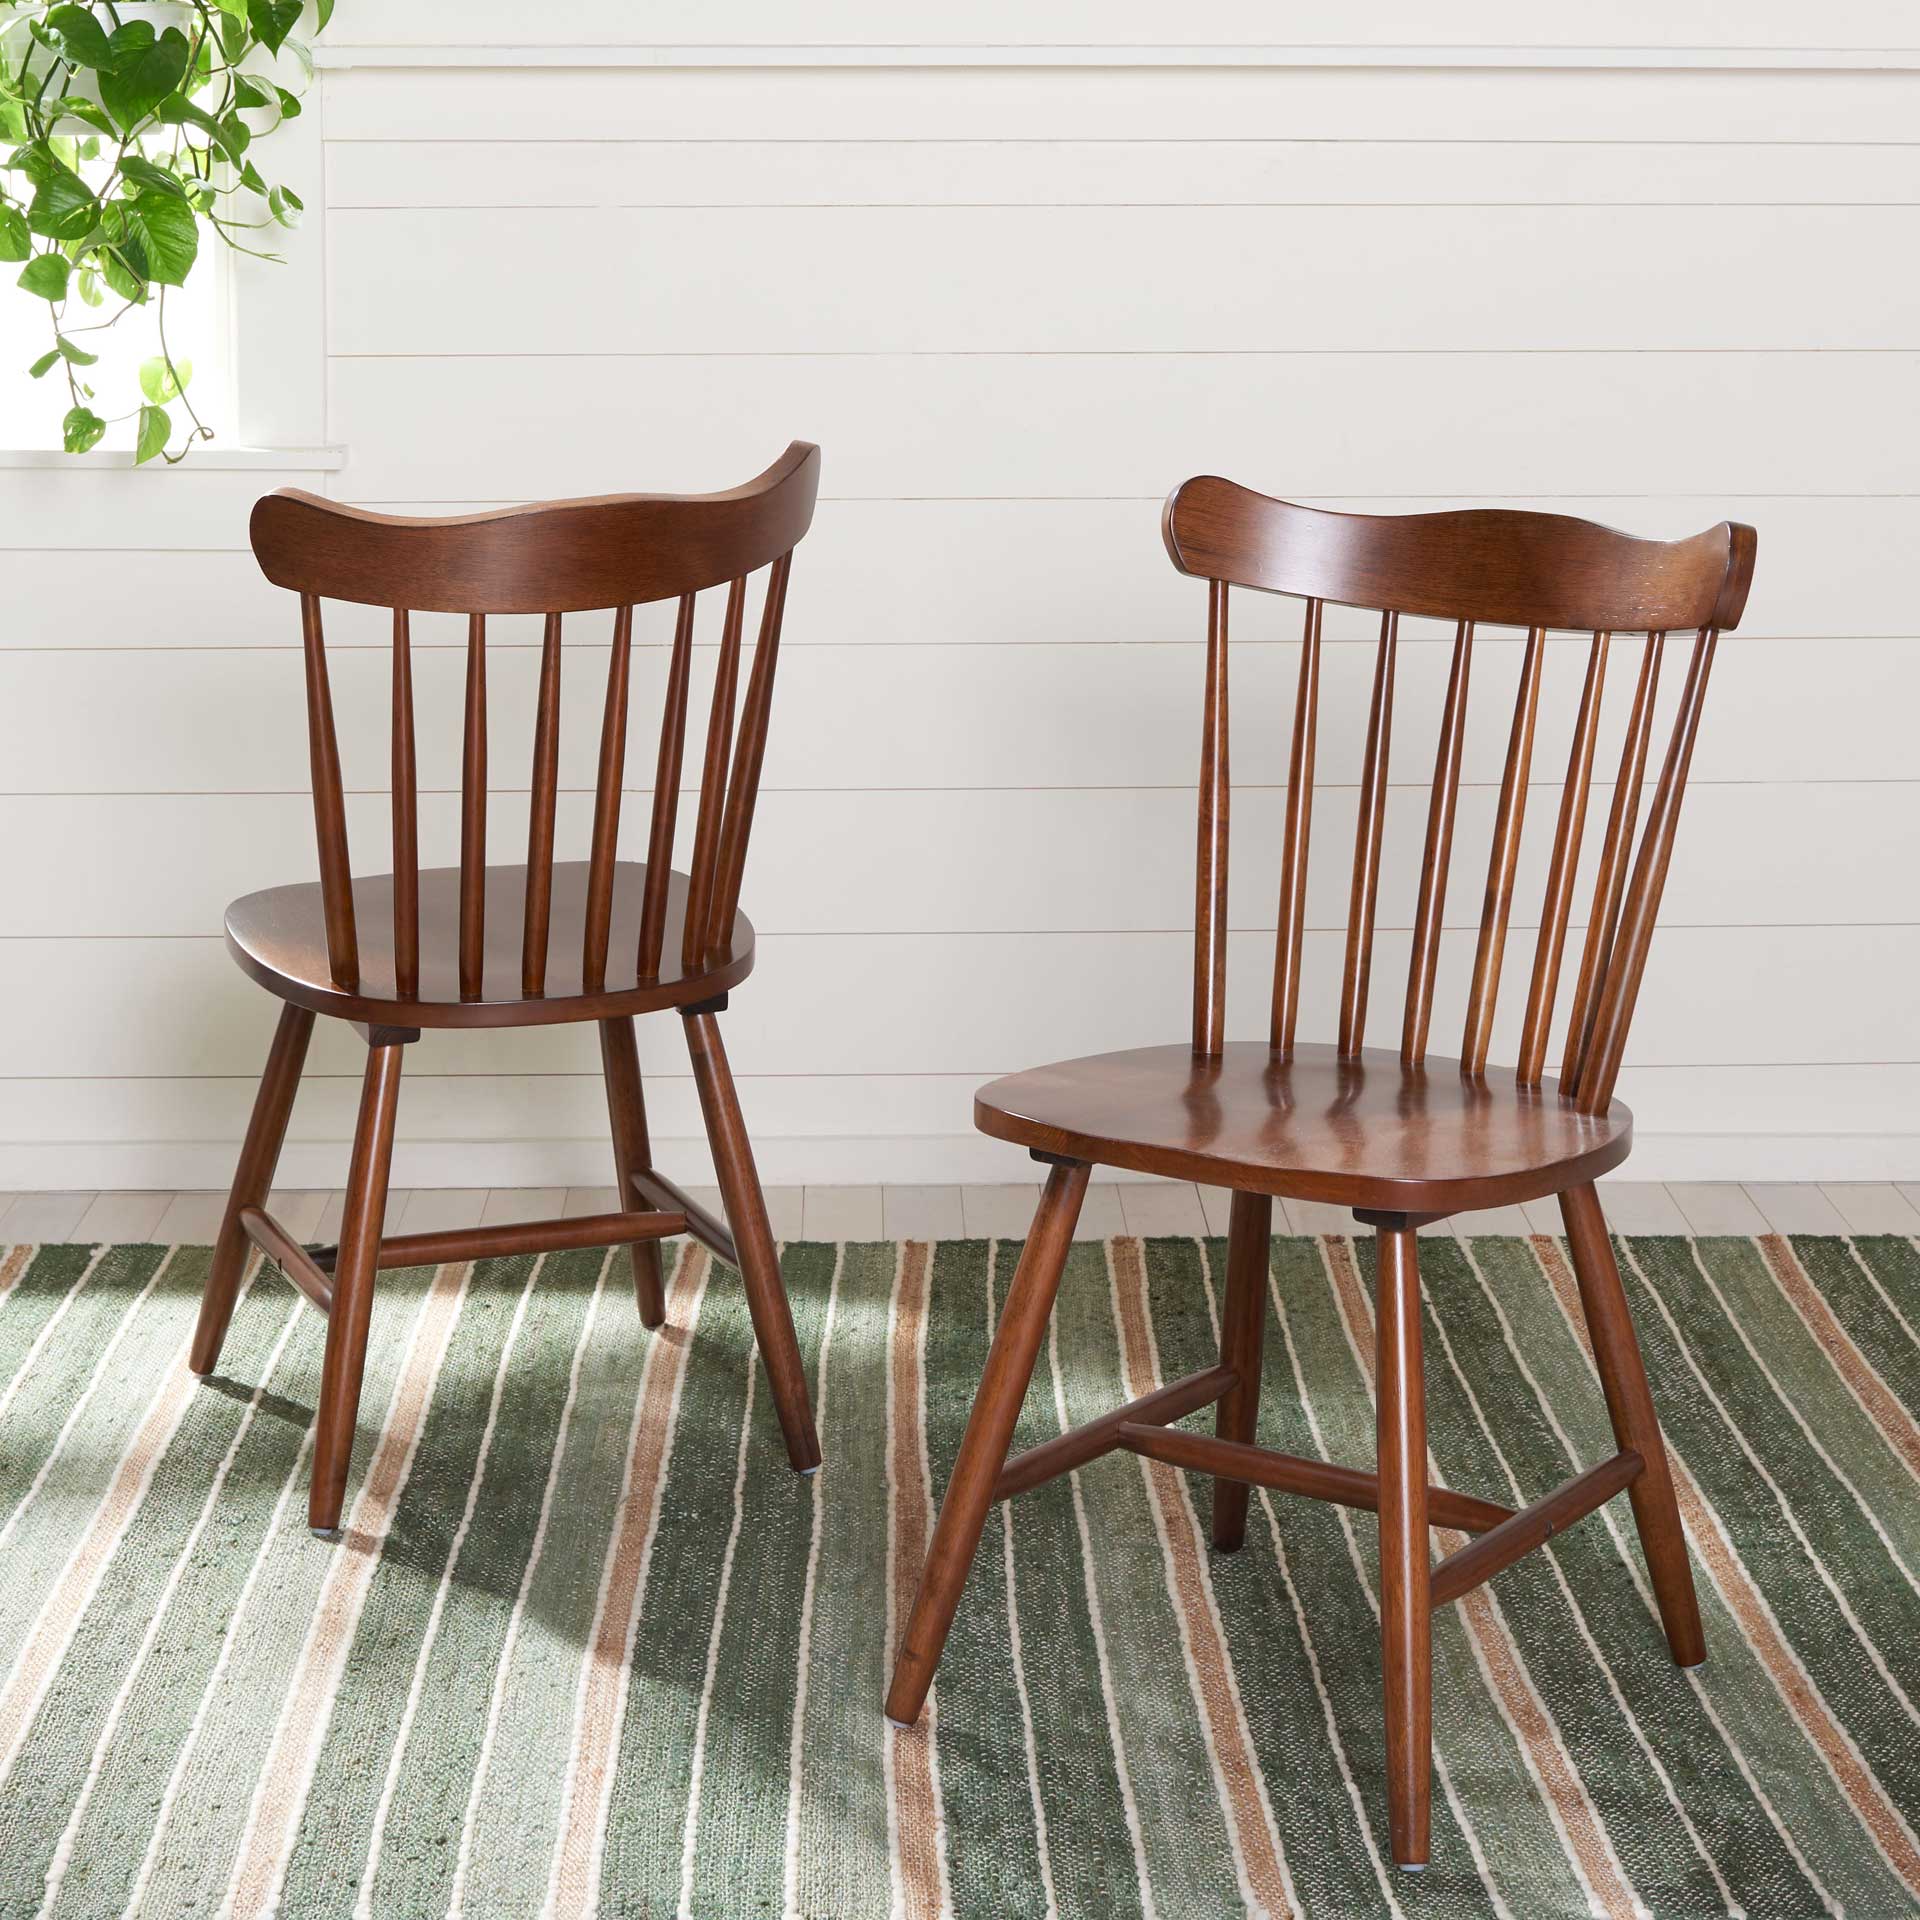 Reese Dining Chair Walnut (Set of 2)